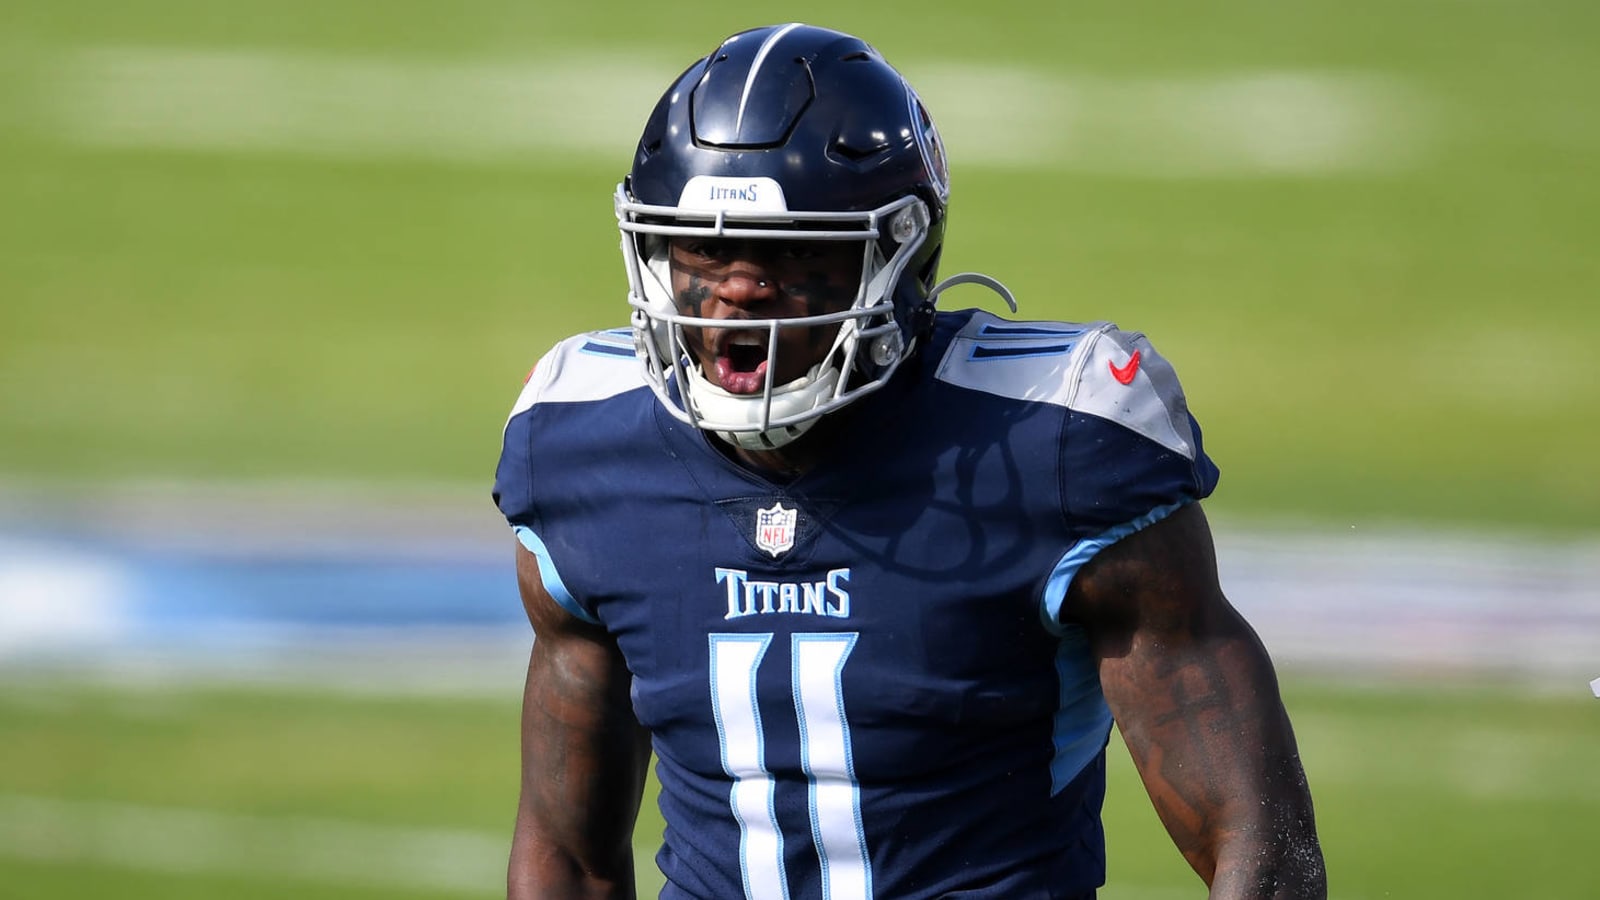 Titans WR A.J. Brown expected to be ready for Week 1 despite knee injury